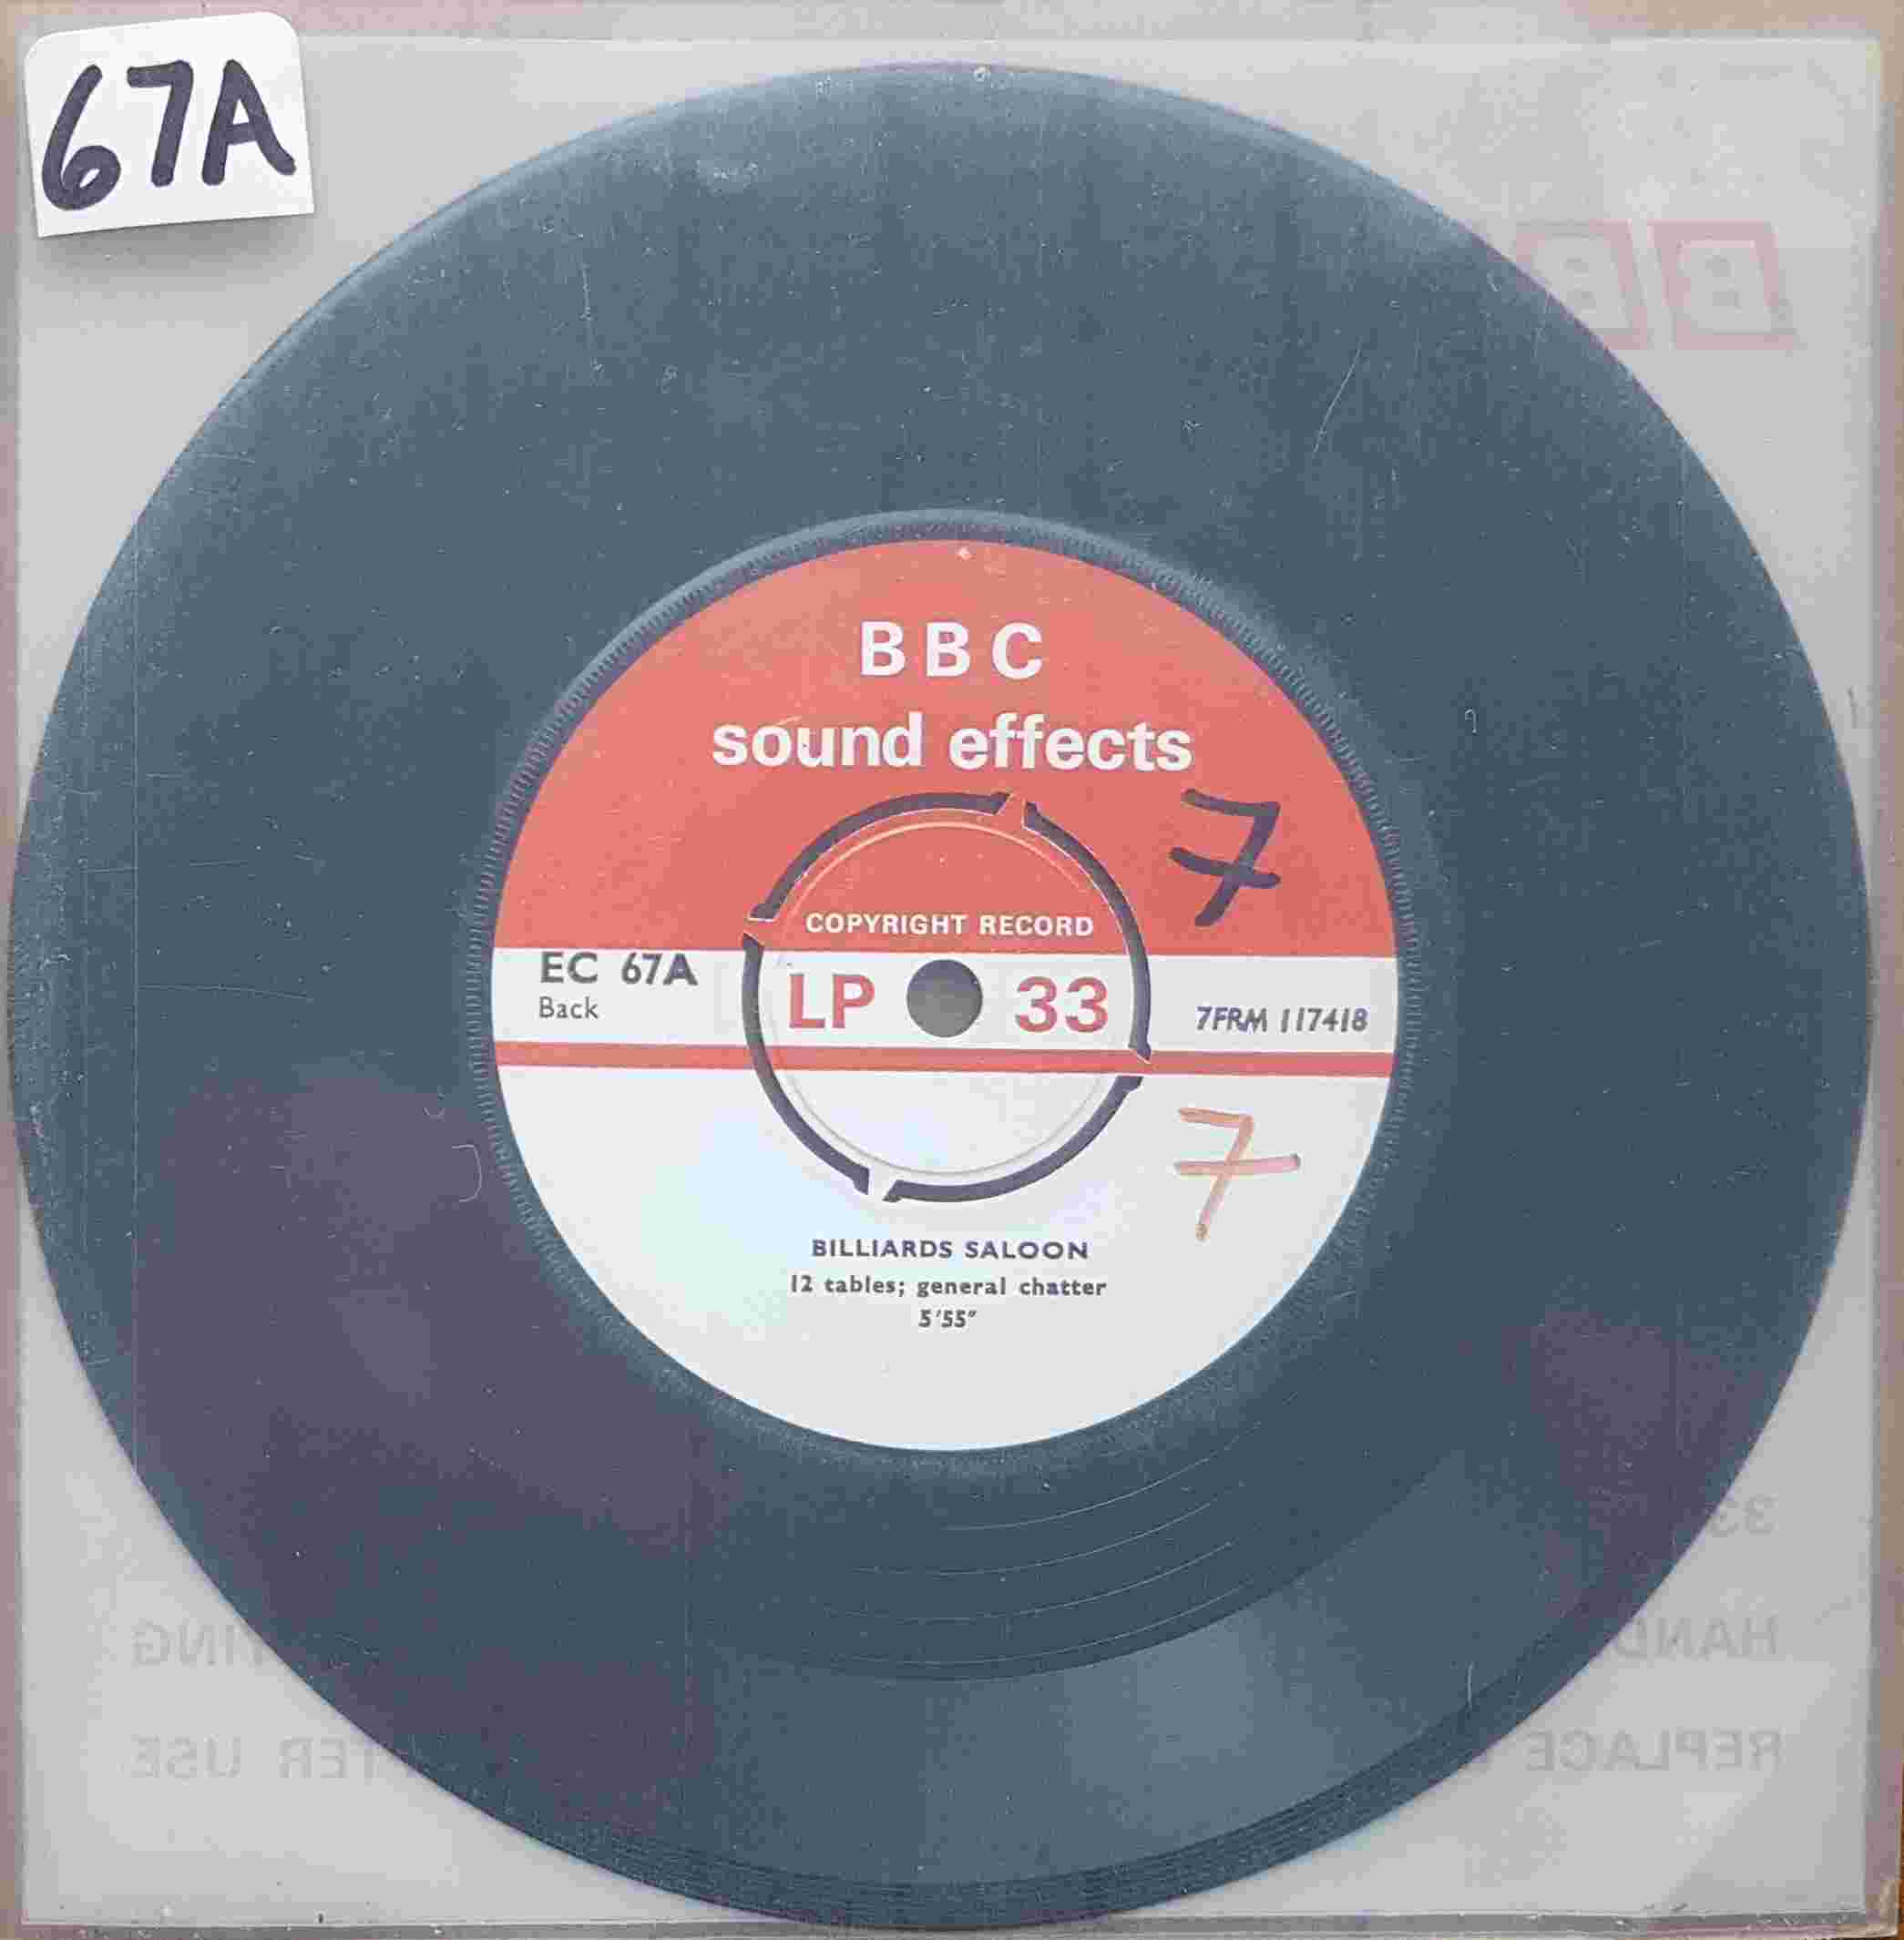 Picture of EC 67A Game of snooker / Billiards saloon by artist Not registered from the BBC records and Tapes library